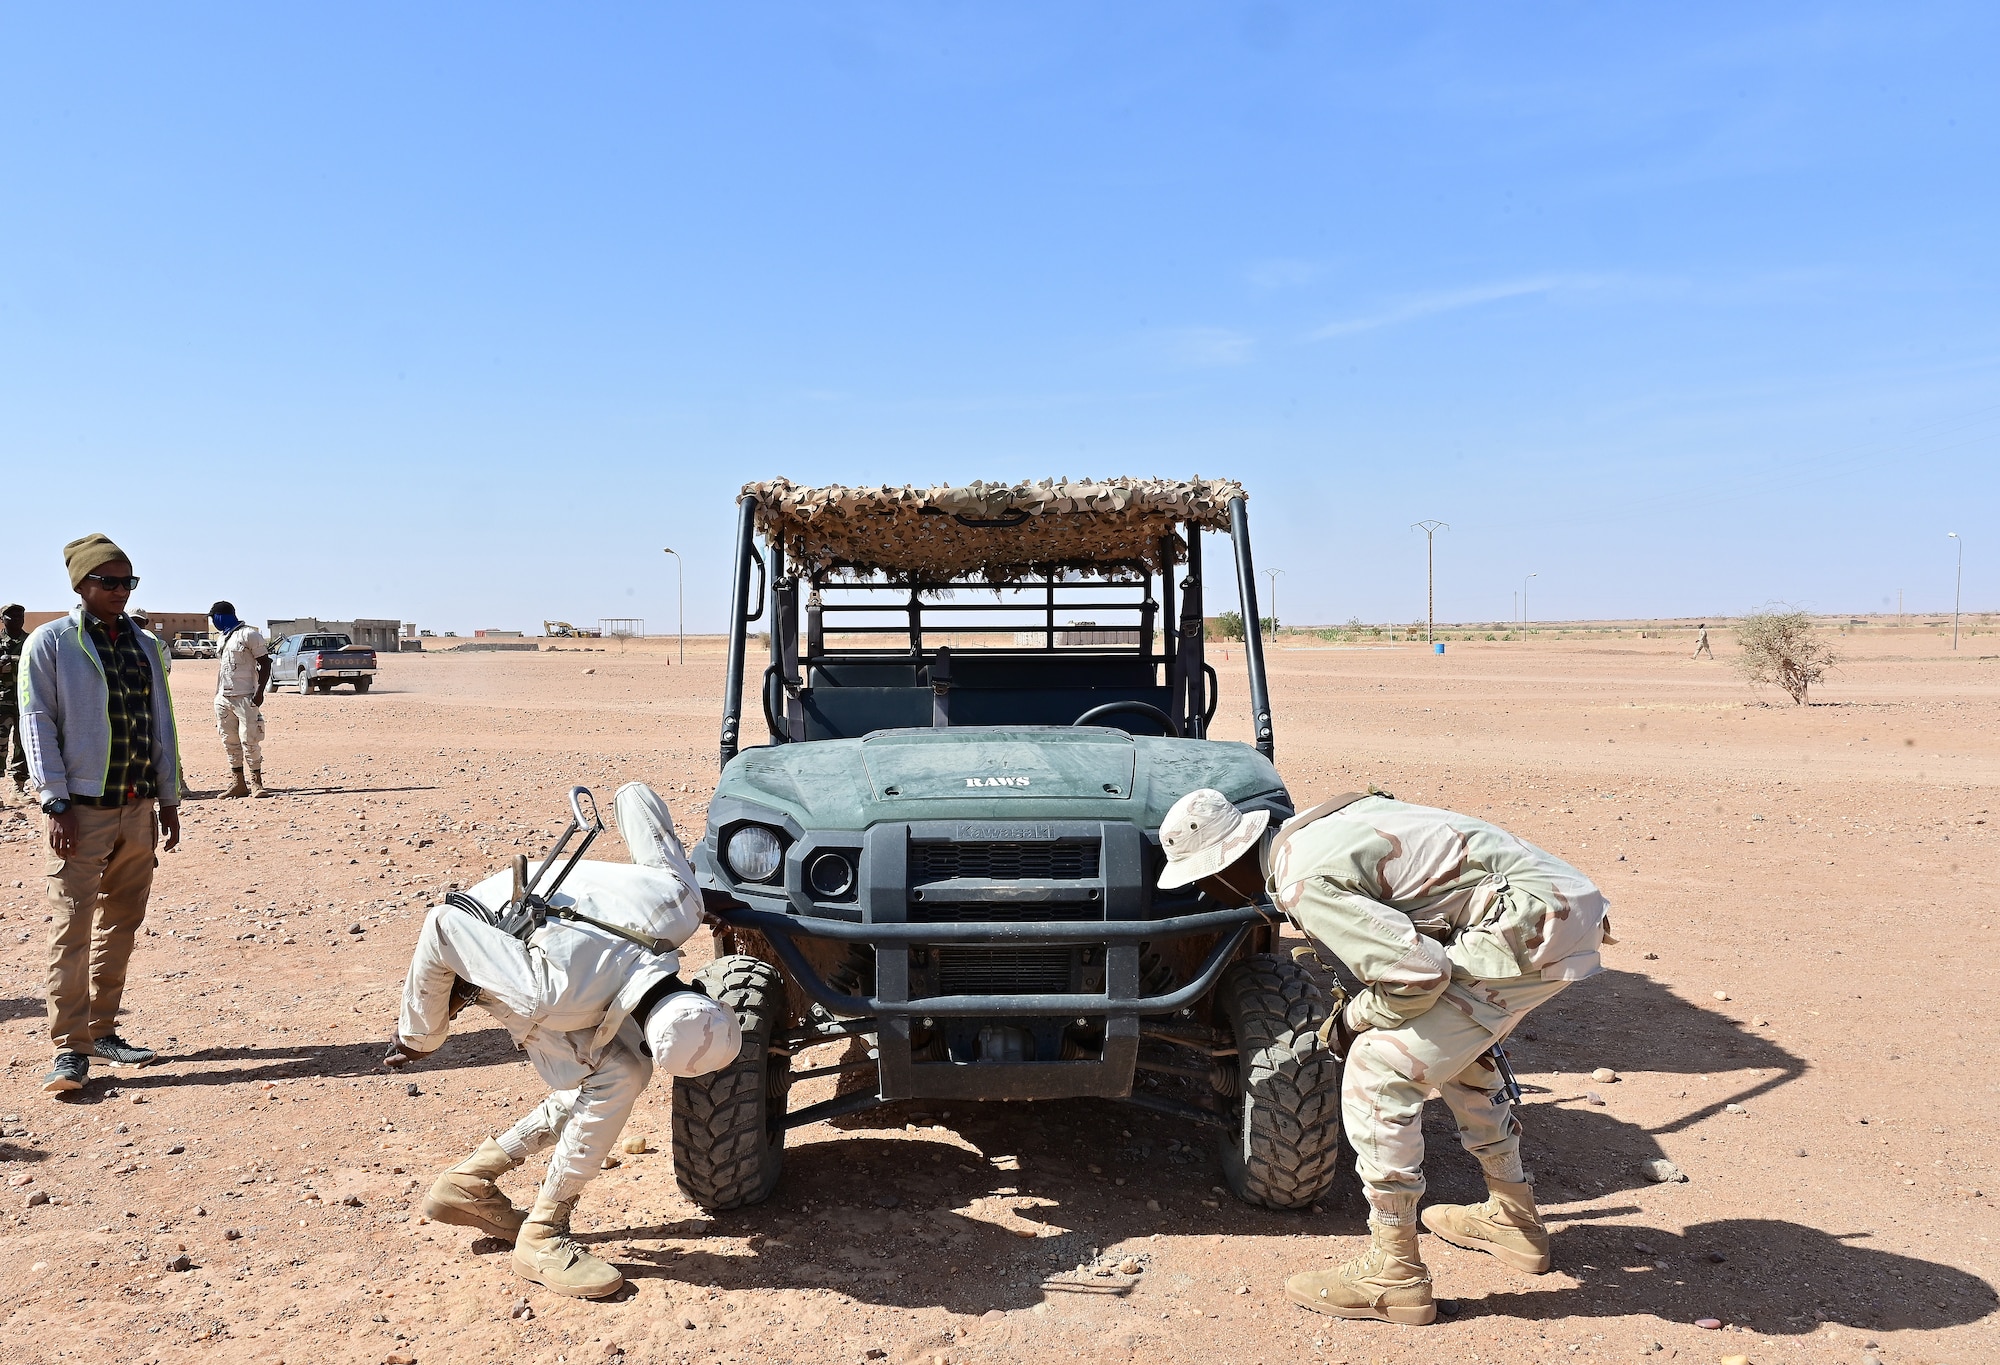 Two Niger Armed Forces (French language: Forces Armées Nigeriennes) members practice vehicle searches during a training event at Nigerien Air Base 201, Agadez, Niger, Feb. 17, 2022. The 409th ESFS hosted an eight-week course to train the FAN on various tactics such as combat lifesaving skills, weapon maneuvers, vehicle searches and patrol movements to better counter the escalating violent extremism in the tri-border region of Niger, Burkina Faso, and Mali. (U.S. Air Force photo by Tech. Sgt. Stephanie Longoria)